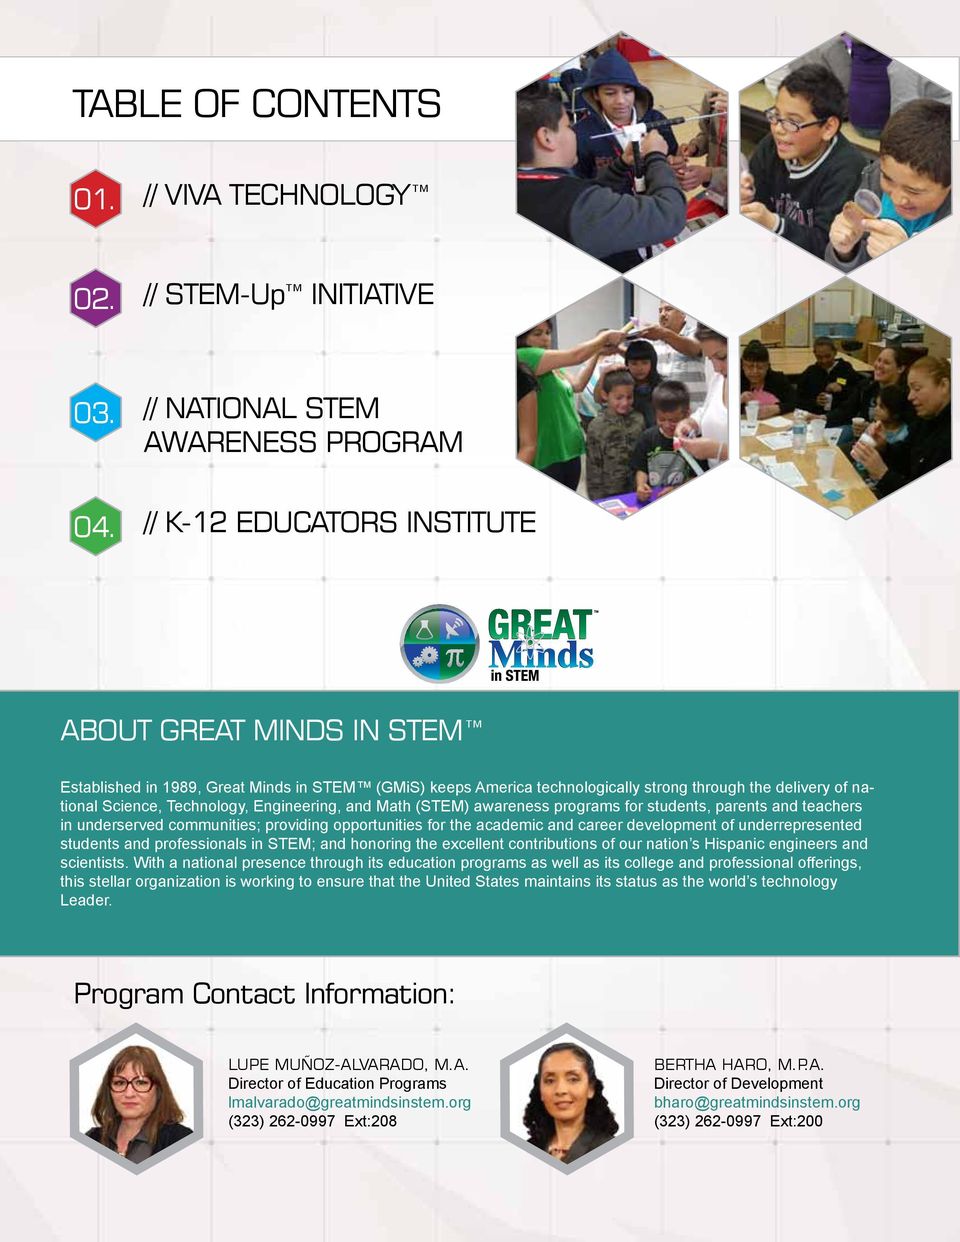 national Science, Technology, Engineering, and Math (STEM) awareness programs for students, parents and teachers in underserved communities; providing opportunities for the academic and career